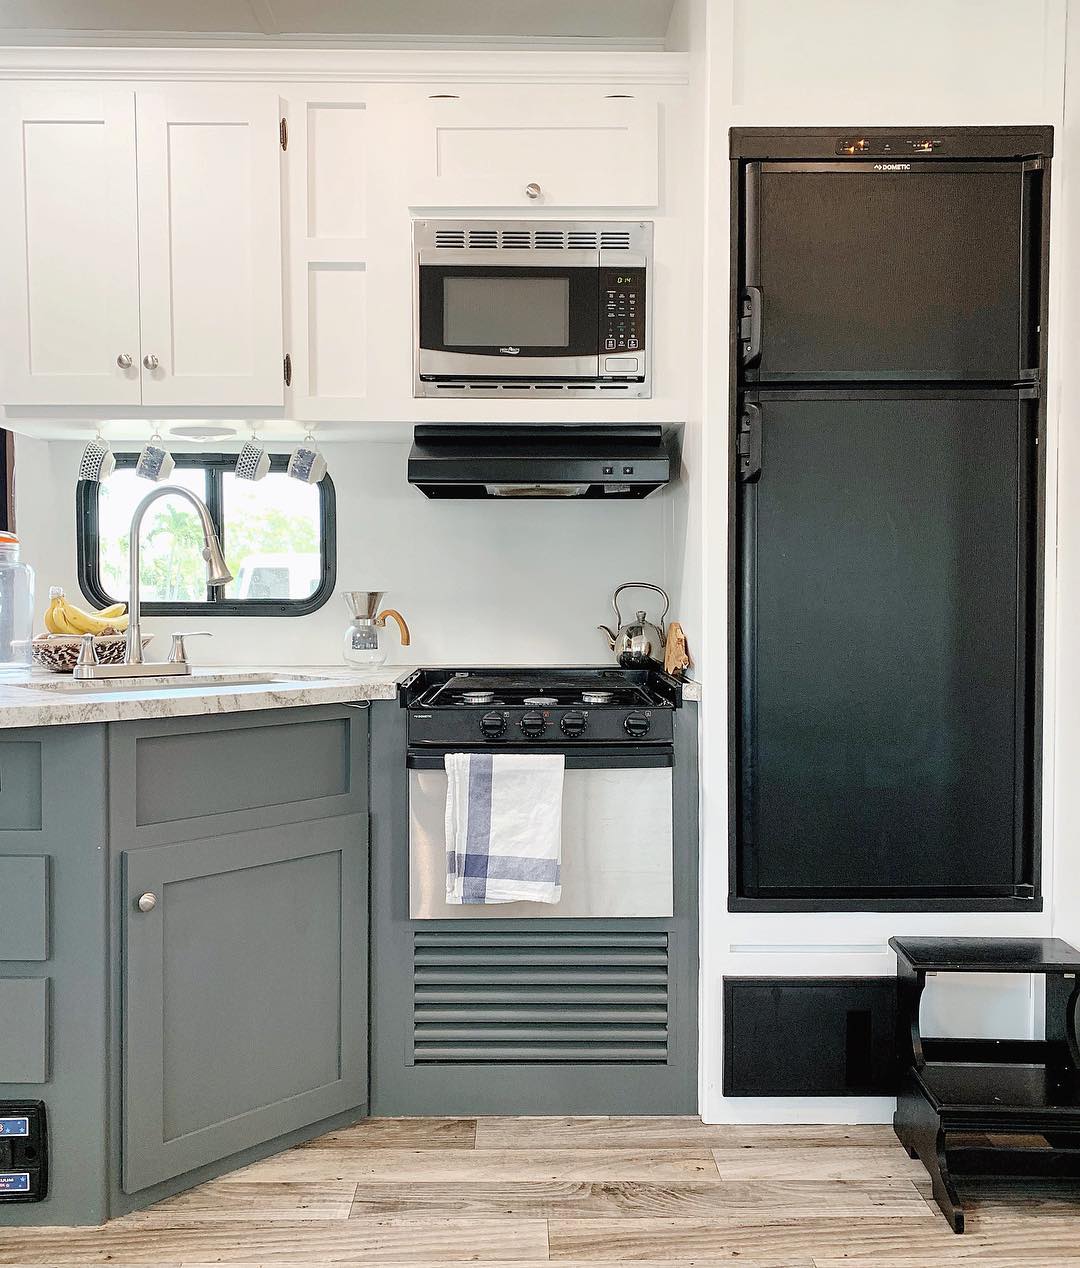 new appliances added into RV kitchen photo by Instagram user @_the_fergusons